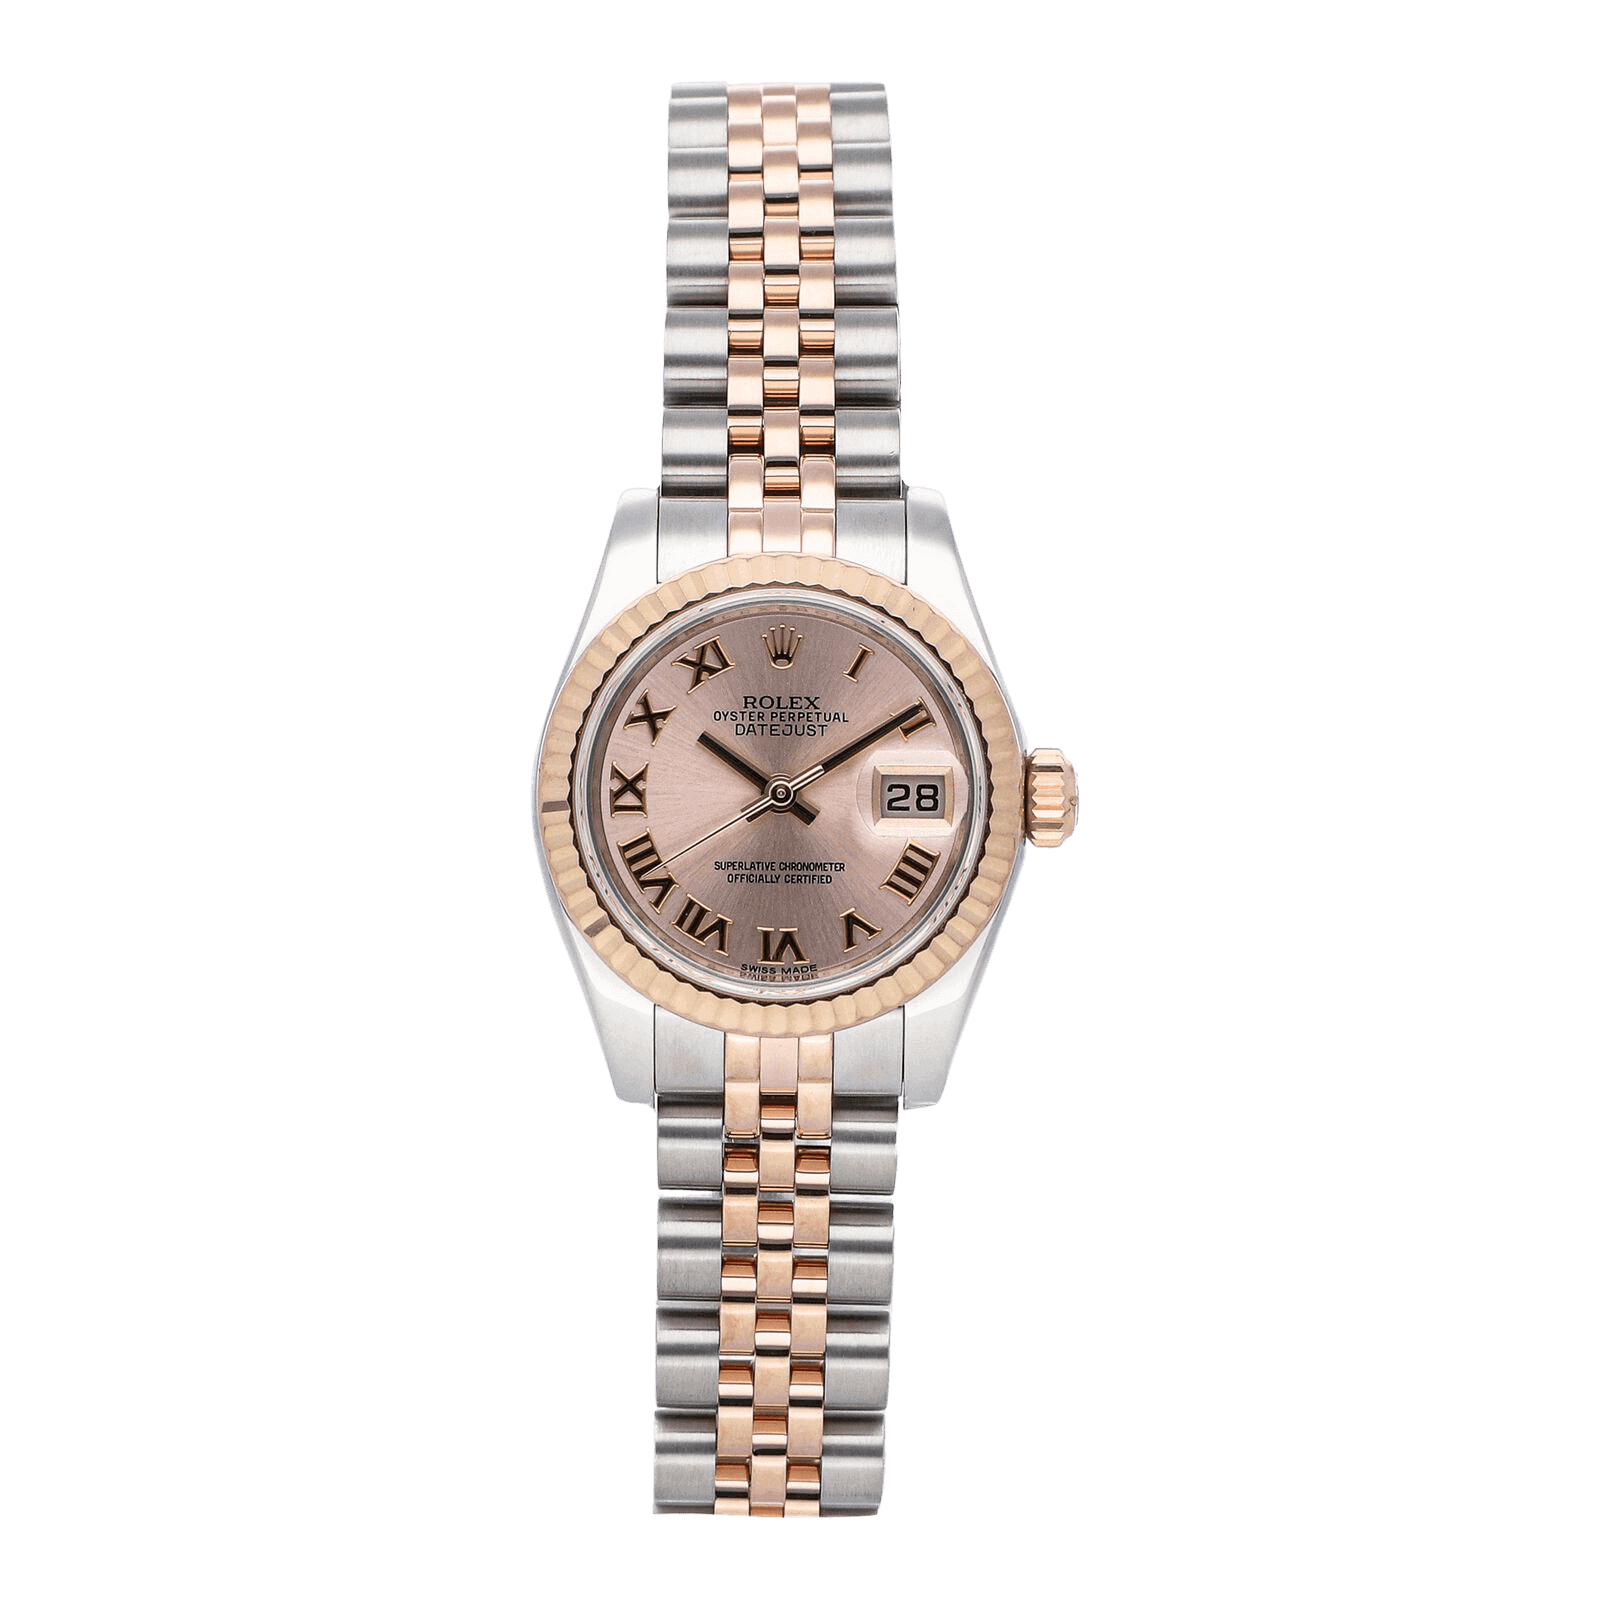 silver and rose gold women's rolex